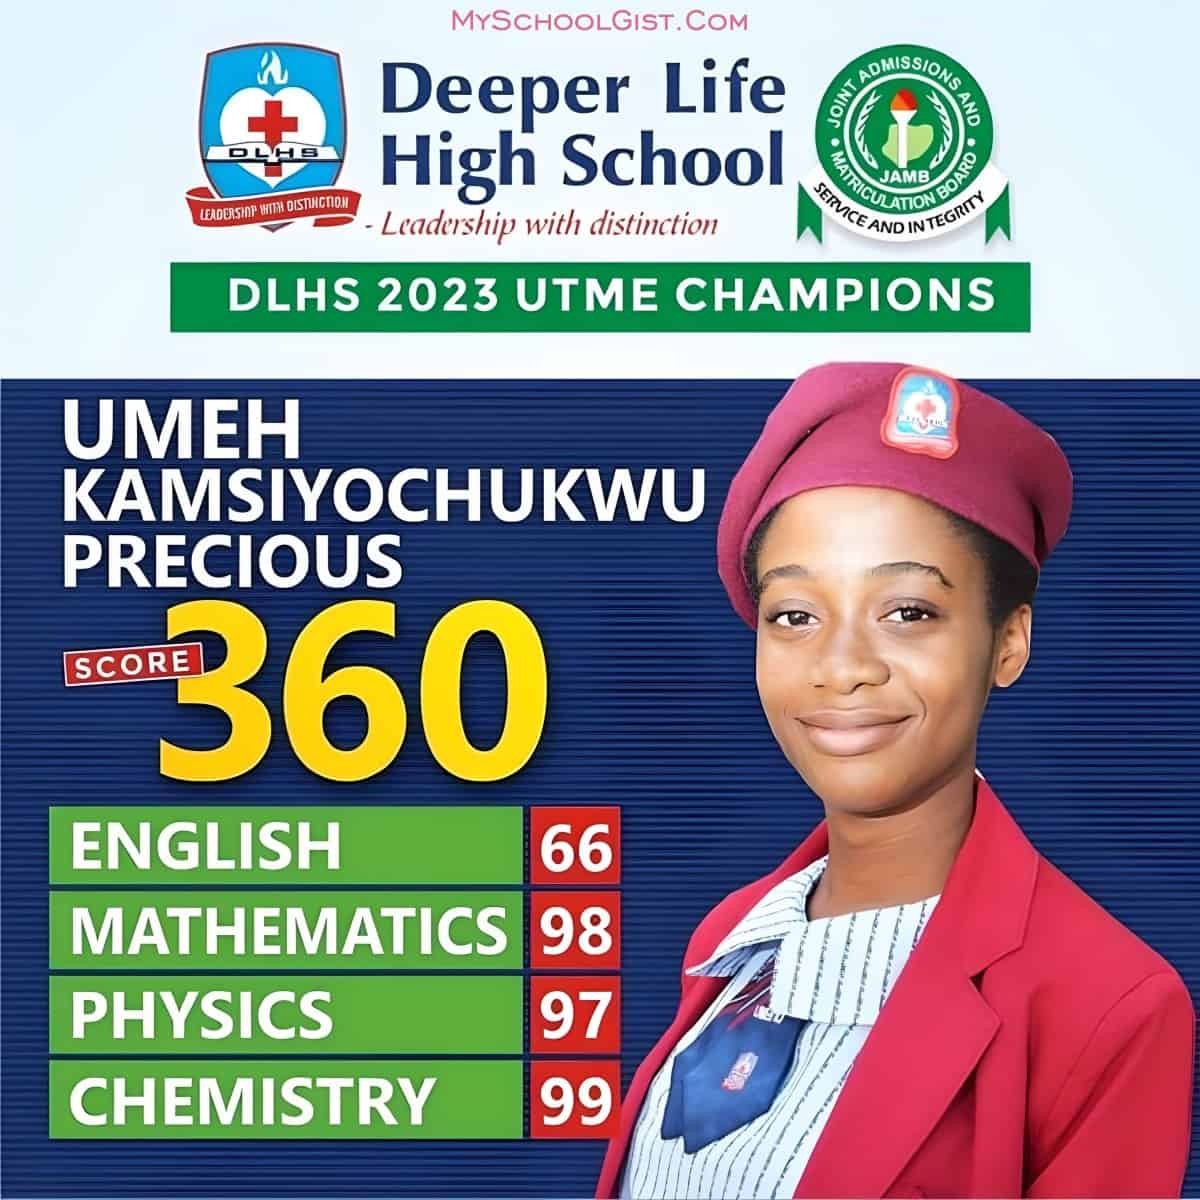 Top UTME Scorer Shares Her Journey to Success